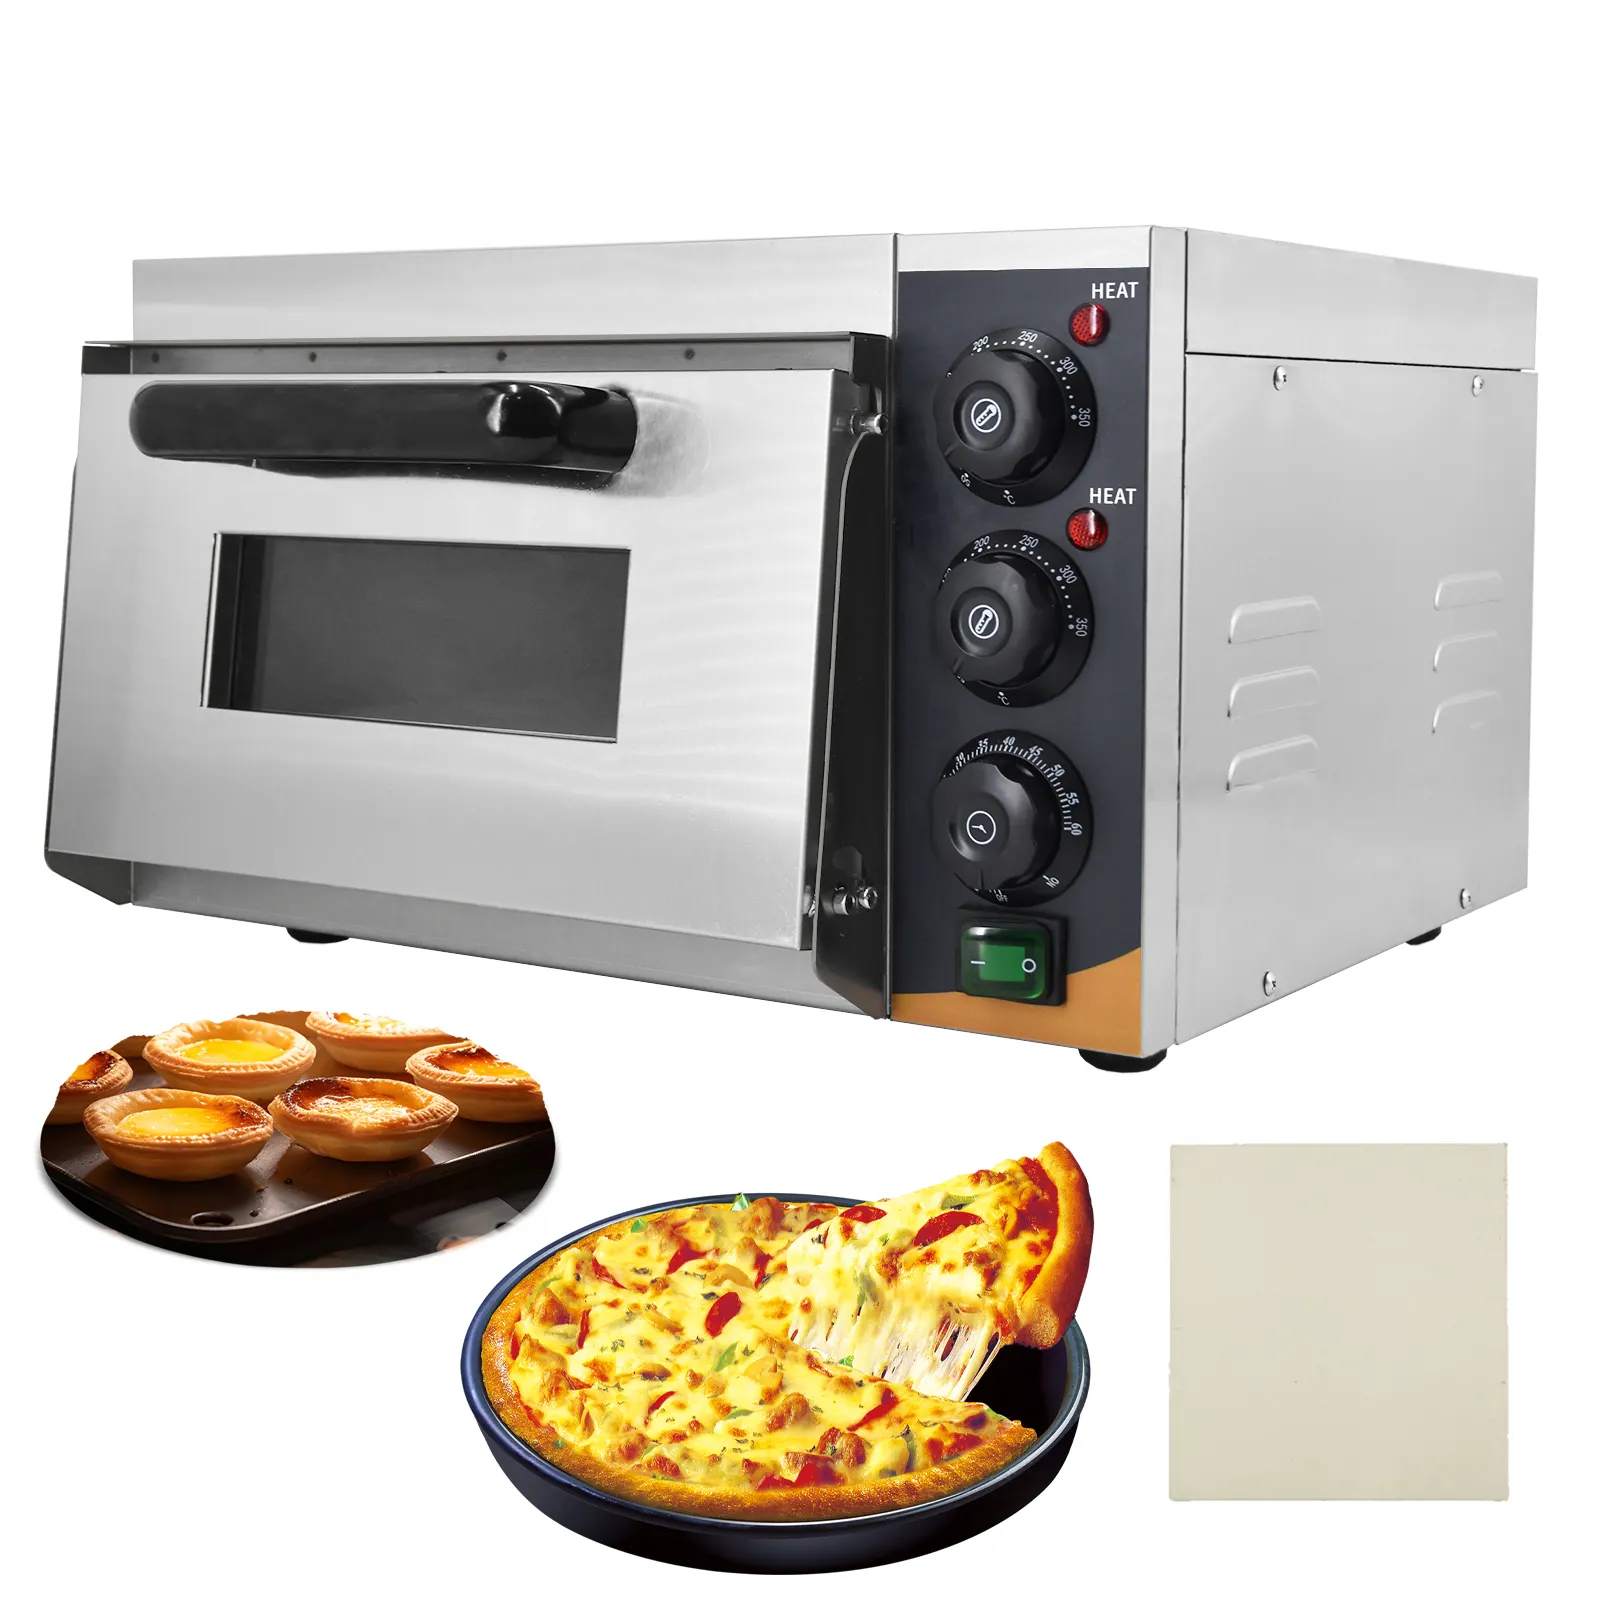 Commercial 12 inch electric stainless steel Italy high temperature toasters baking portable ovens pizza oven